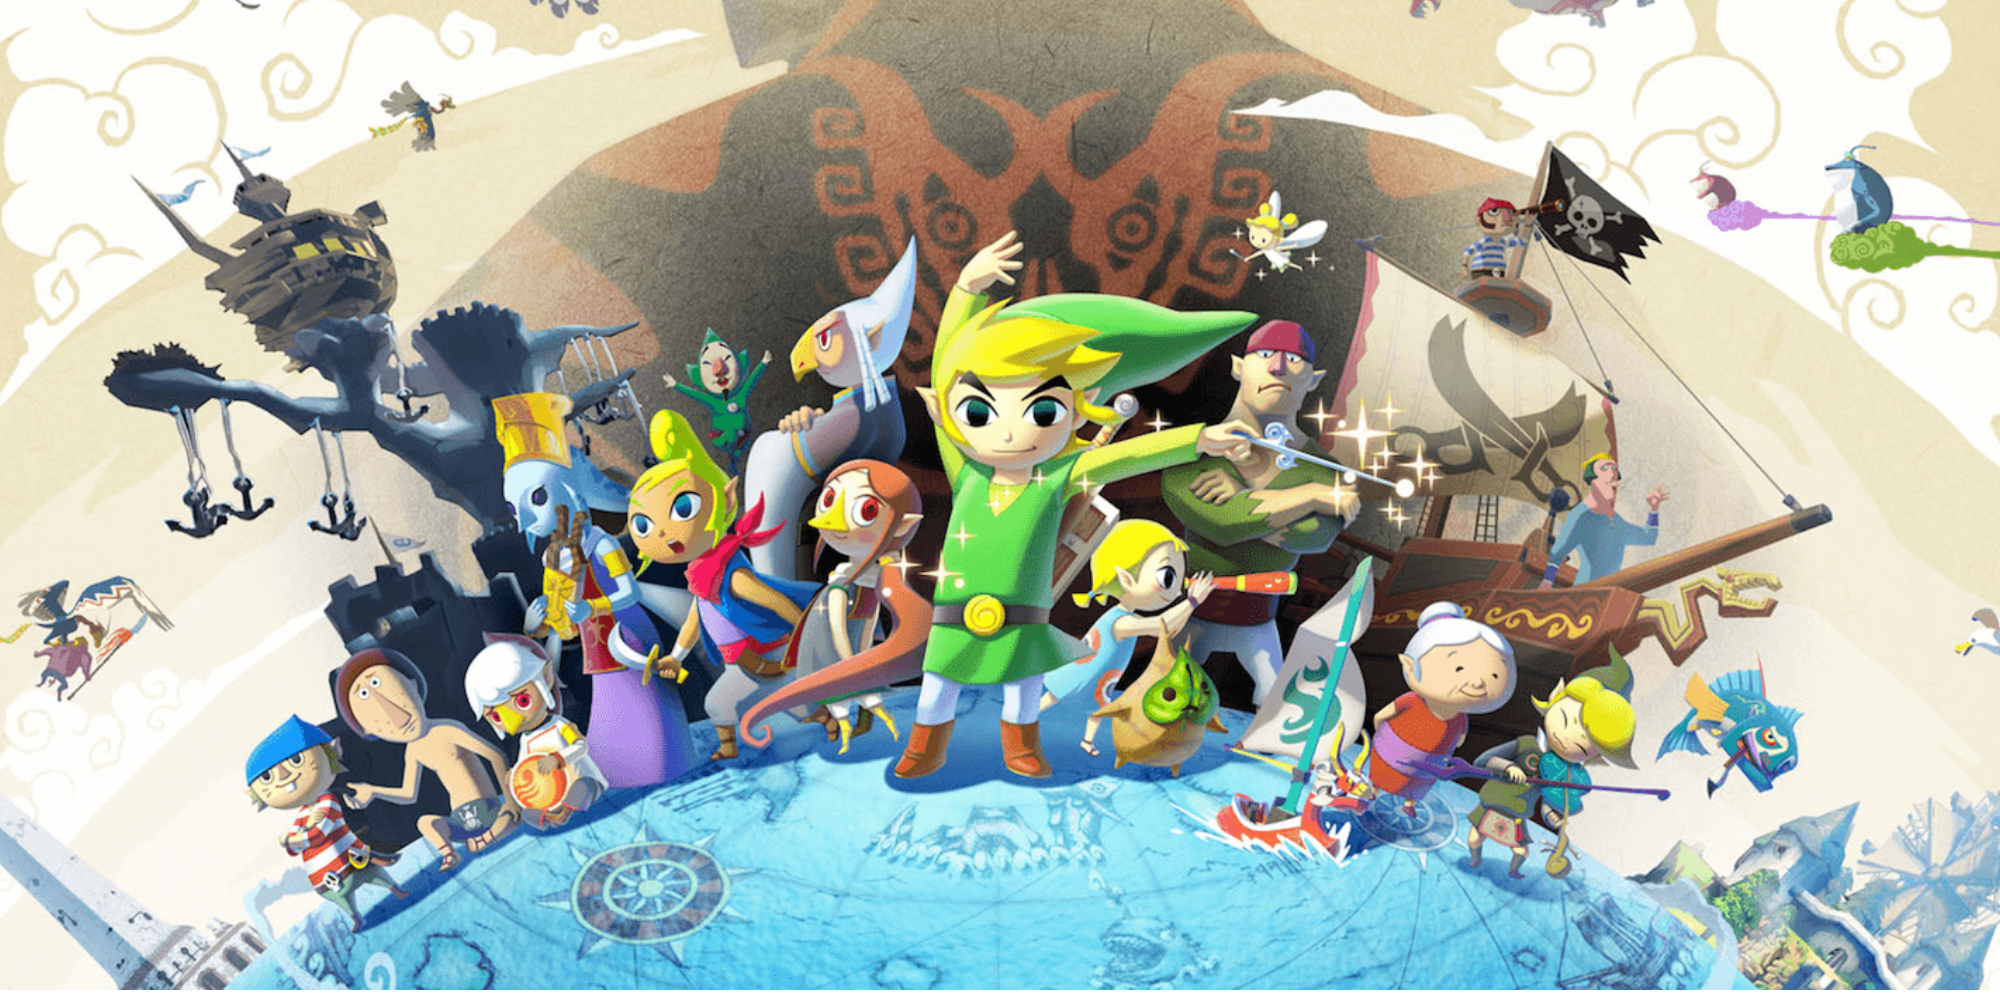 Link holding the Wind Waker and smiling surrounded by the cast of Wind Waker